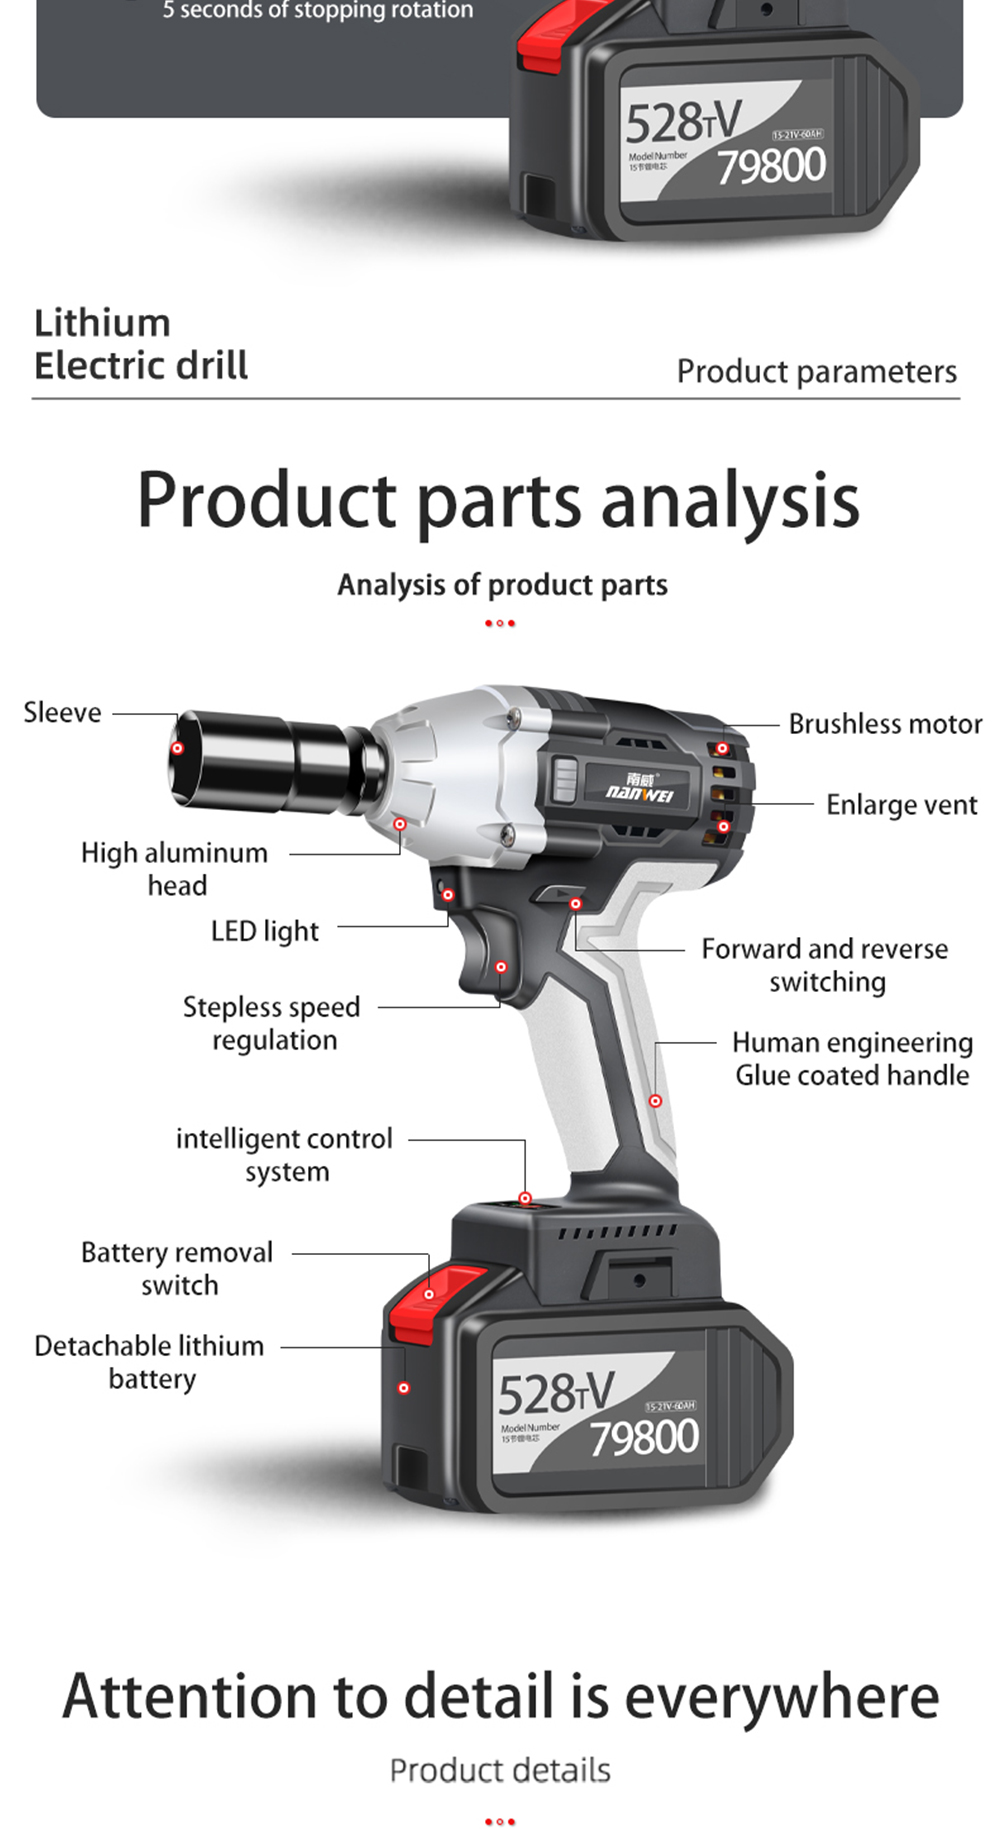 NANWEI-380NM-Brushless-Electric-Impact-Wrench-Adjustable-Speed-Regulation-with-4060Ah-Lithium-Batter-1656619-9